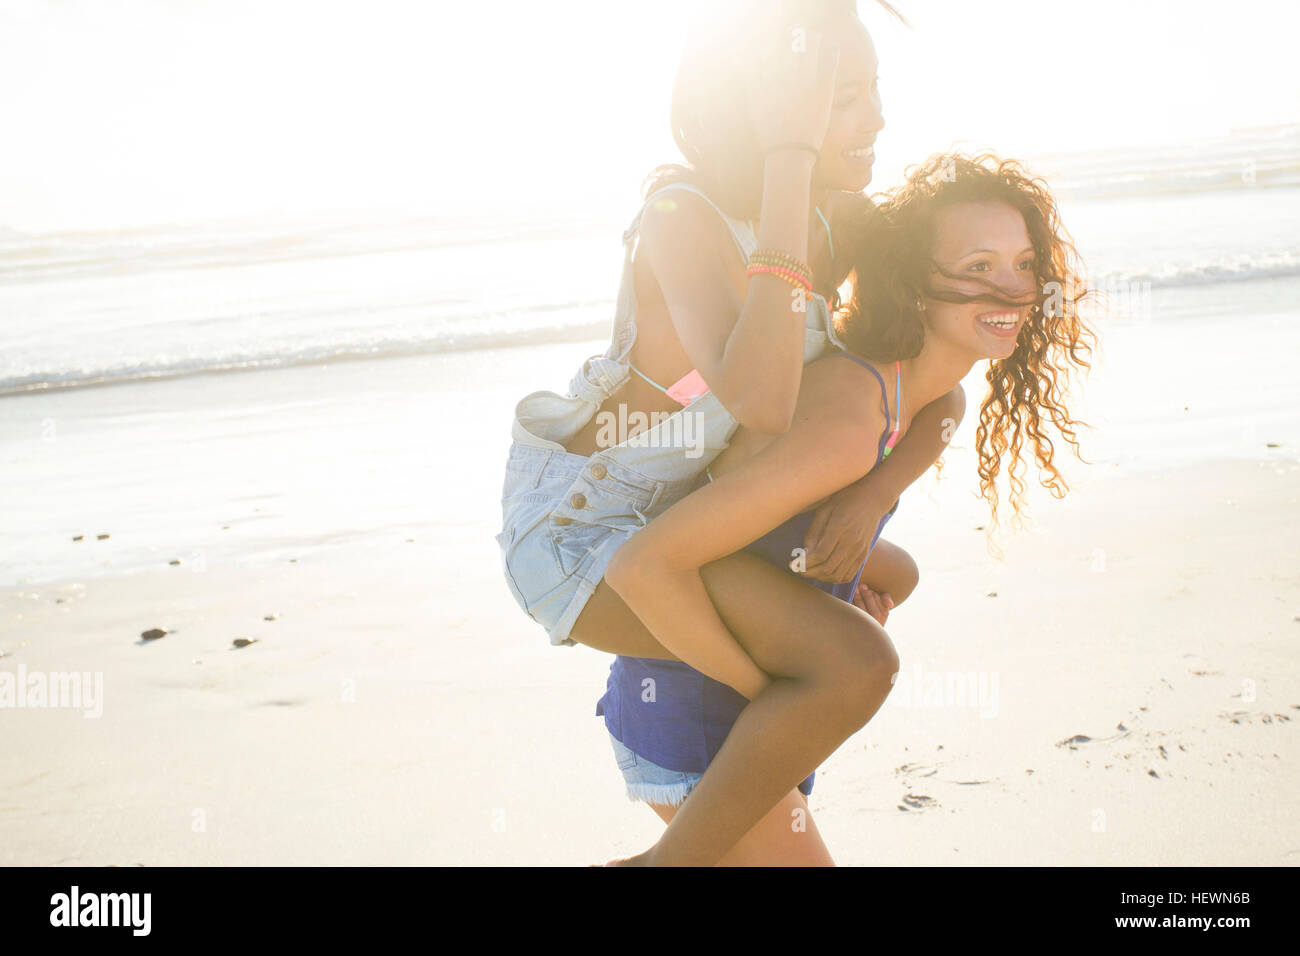 Young woman piggybacking female friend on beach, Cape Town, South Africa Stock Photo